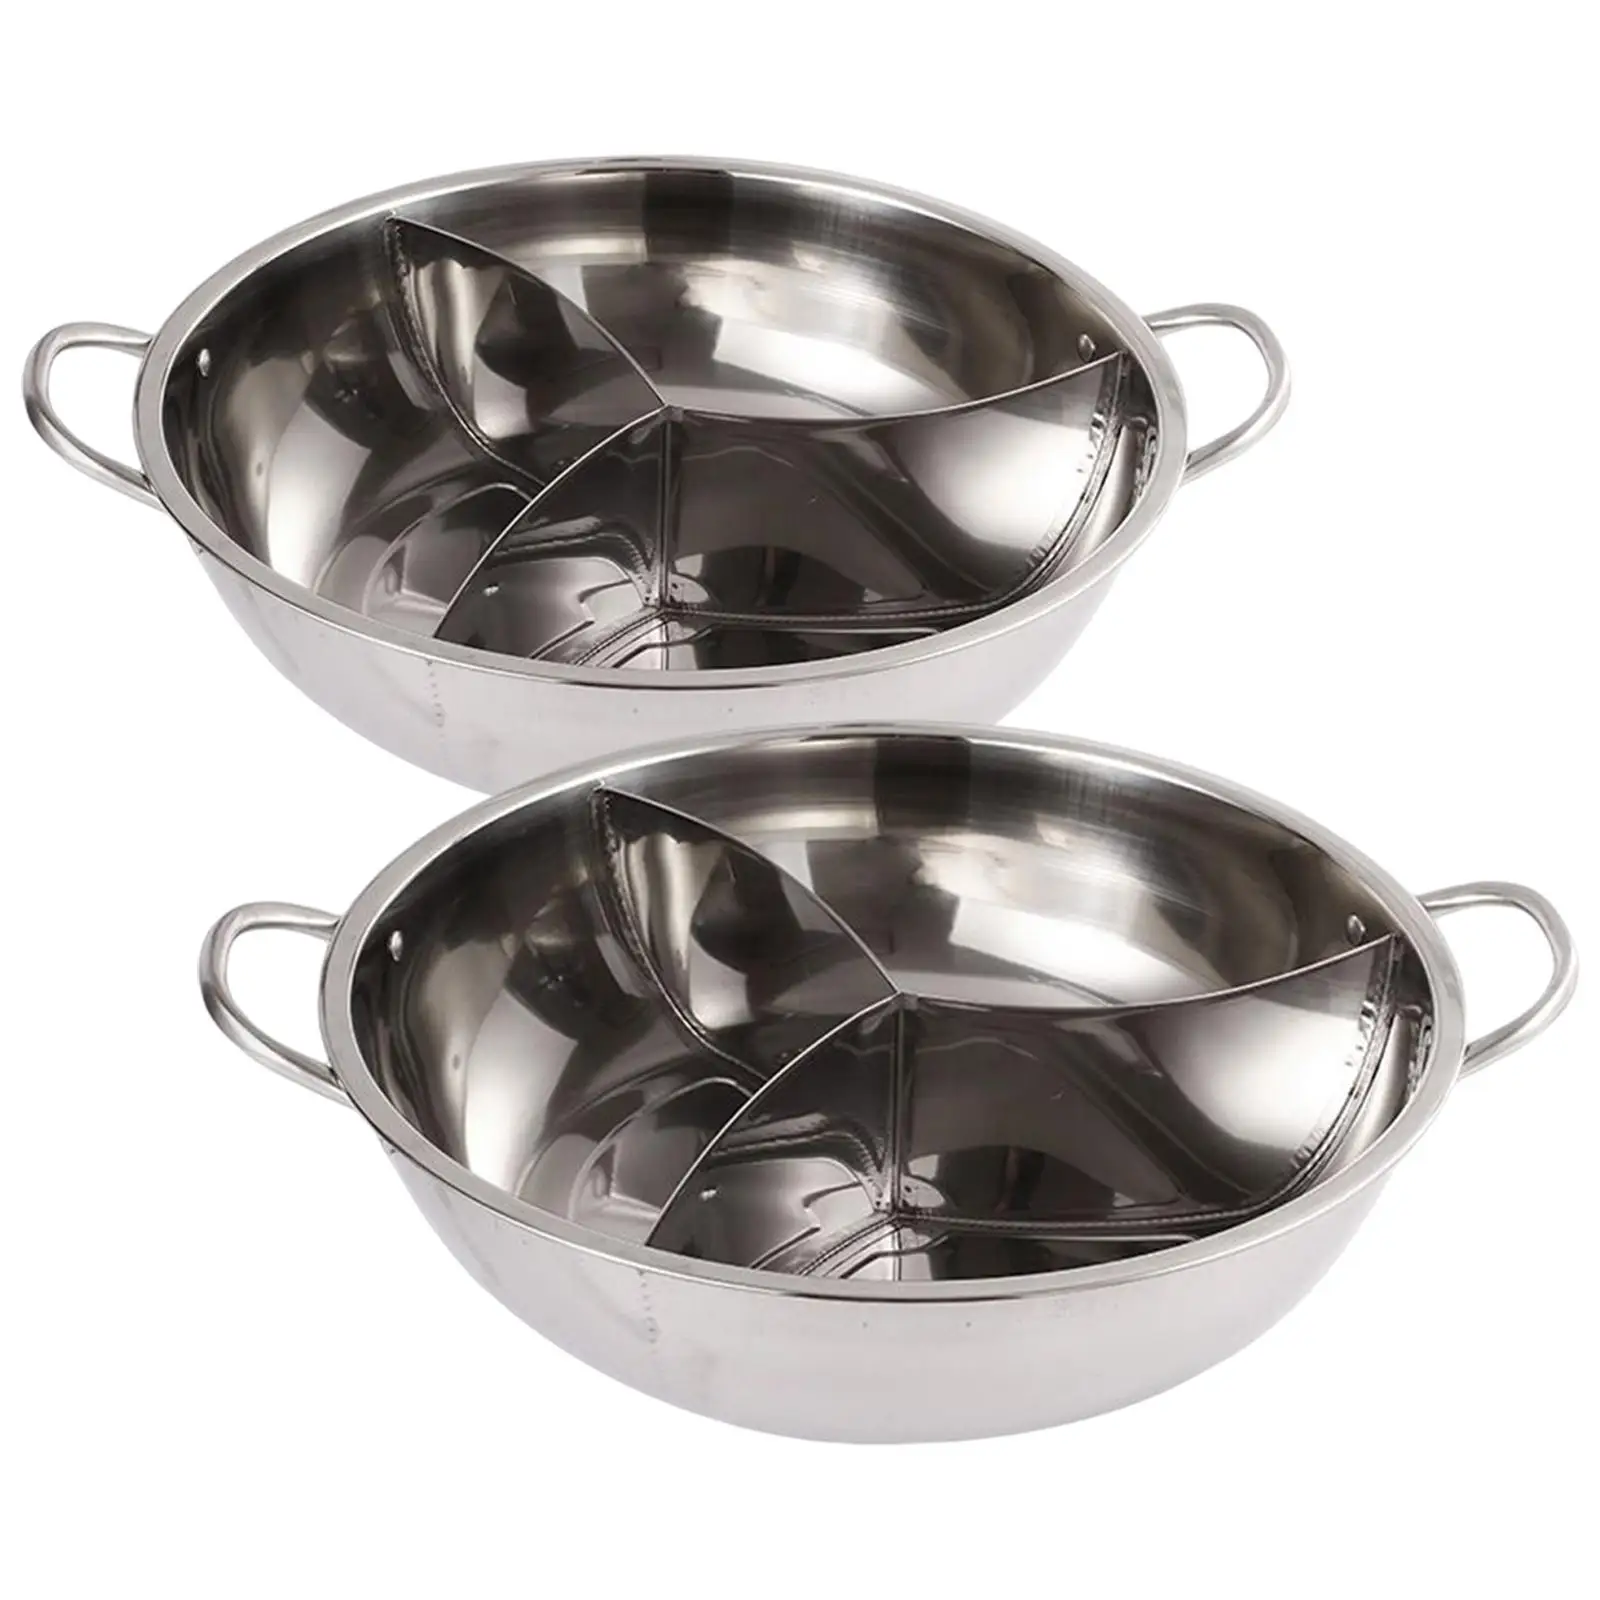 Household Cooking Pot Induction Cookware Soup Pot for